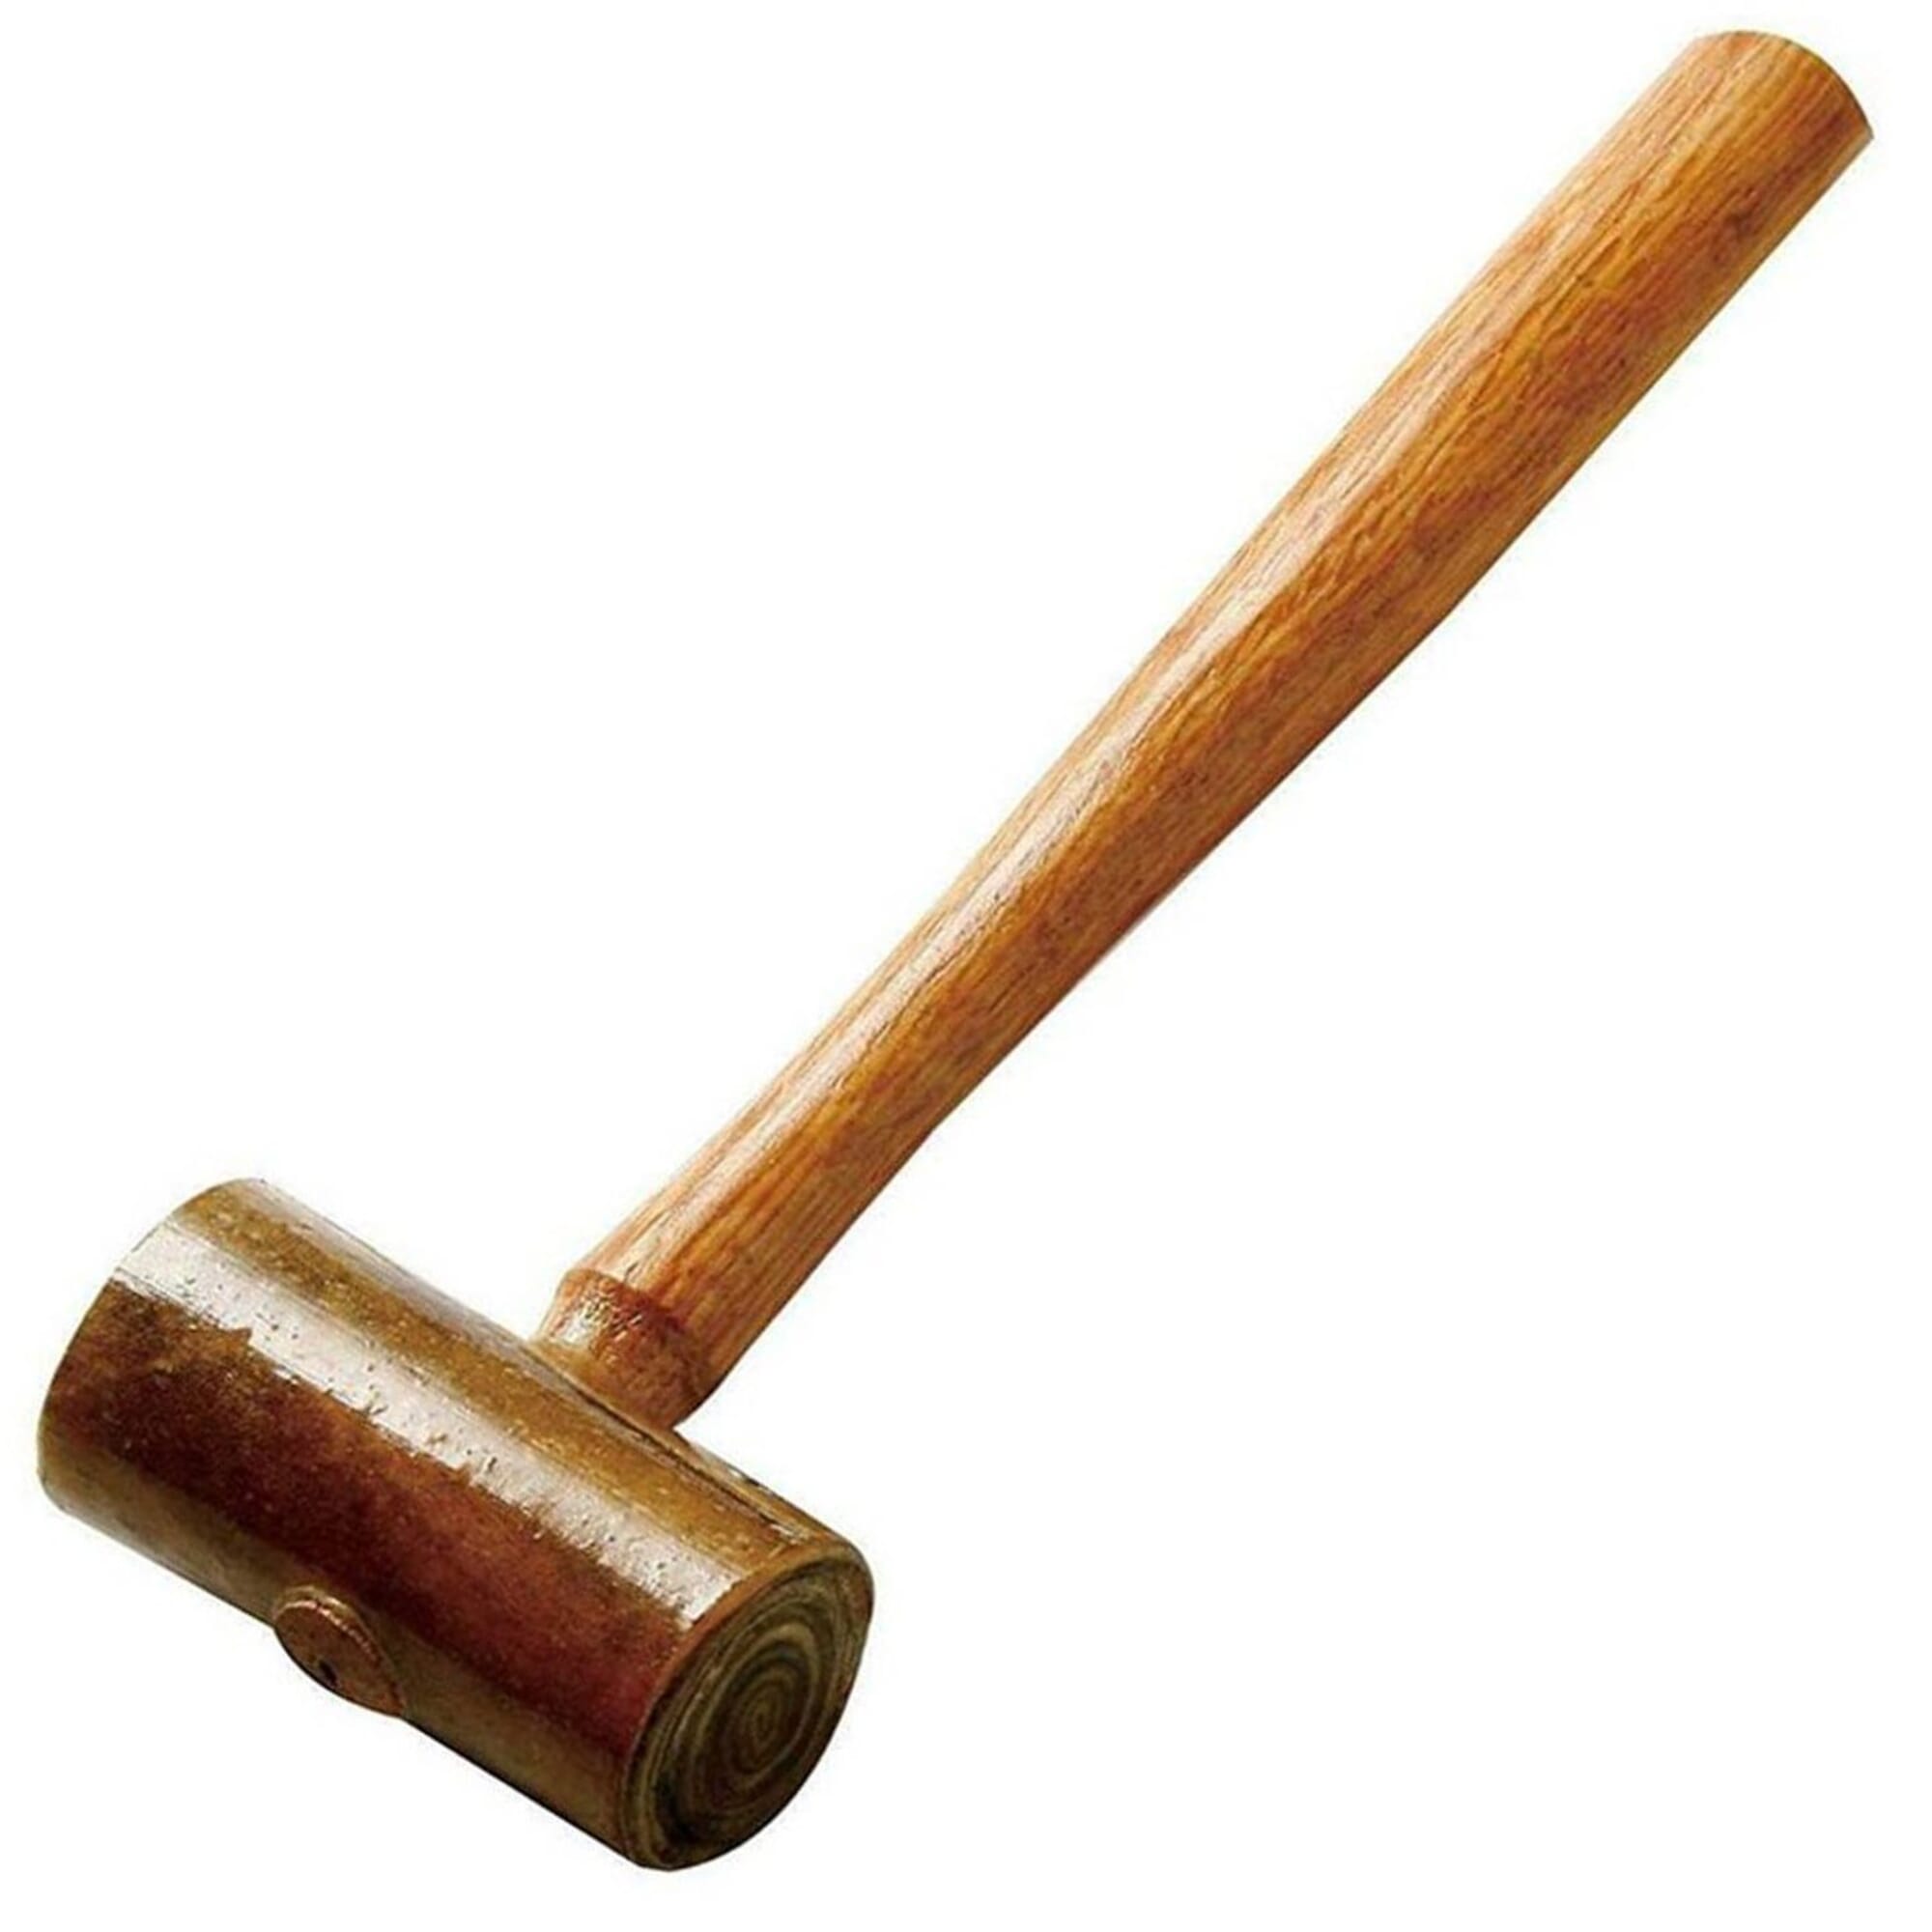 Craft Sha 6oz Leathercraft Rawhide Hammer Jewelers Mallet for Leather Work